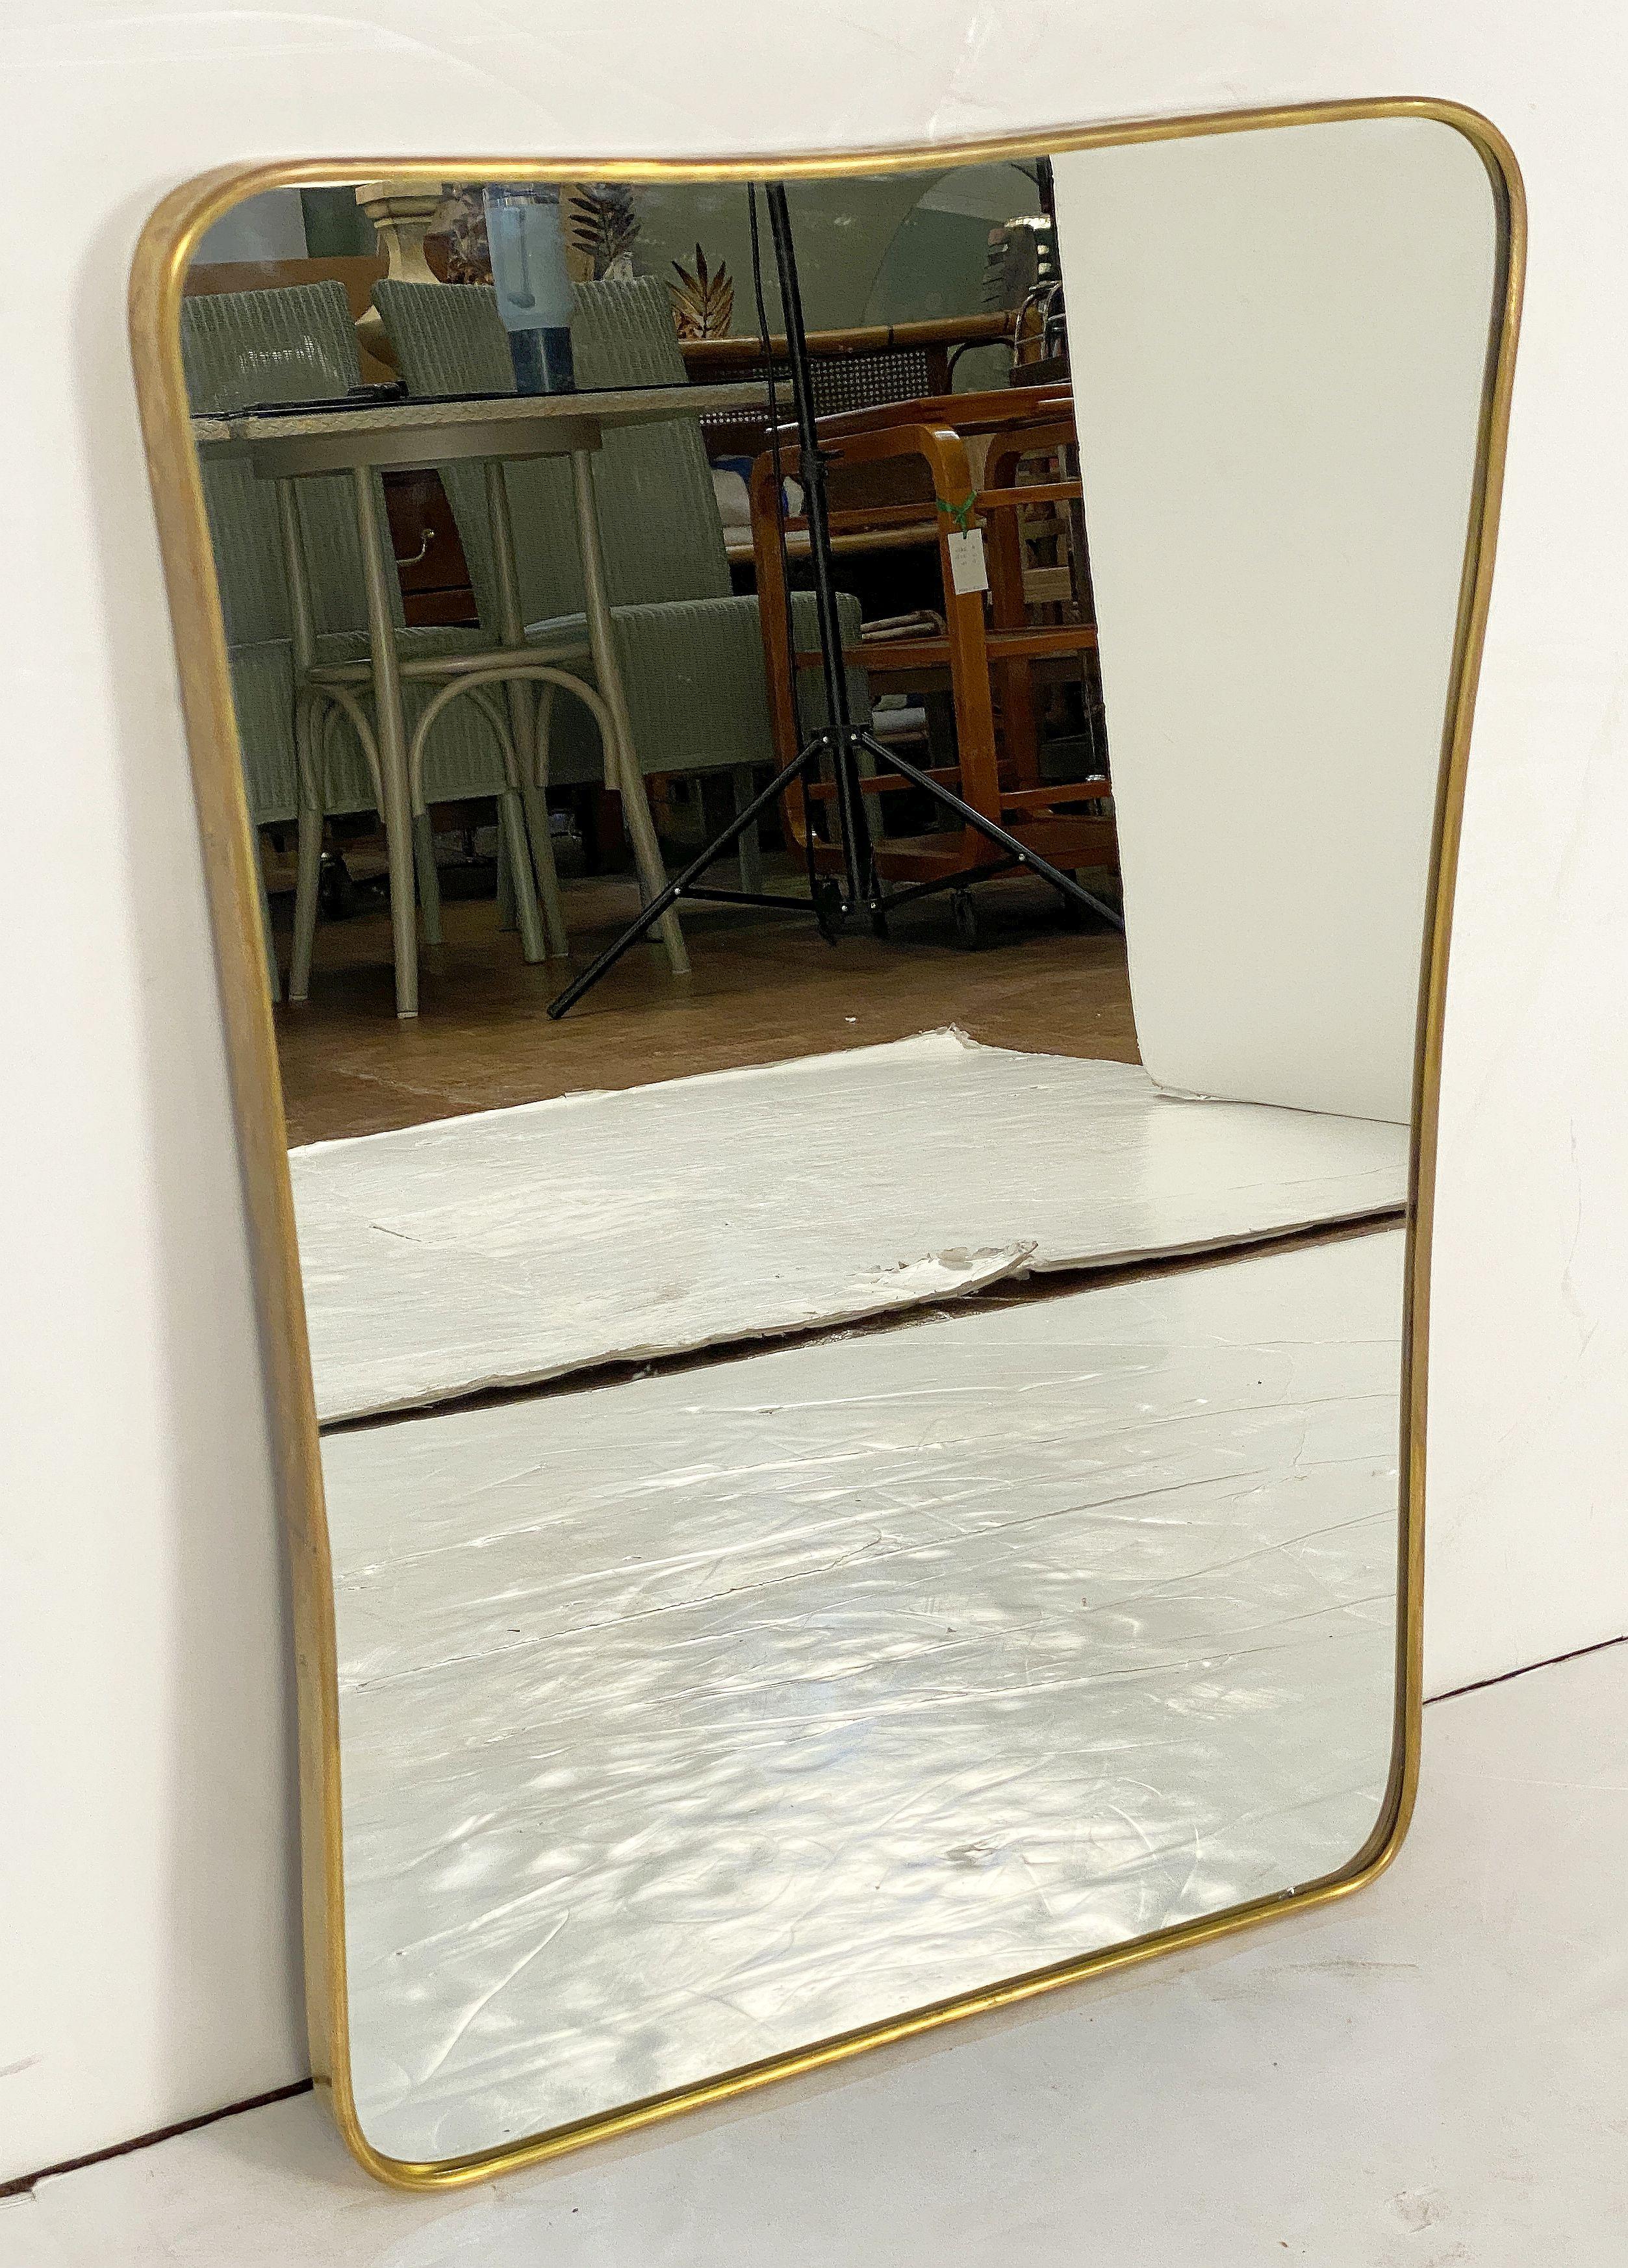 A fine Italian Modern wall mirror featuring a clean, Mid-Century design with an elegant, curved frame in brass, in the style of the famed designer, Gio Ponti. (Italian, 1891-1979)

An architect, furniture and industrial designer and editor, Gio